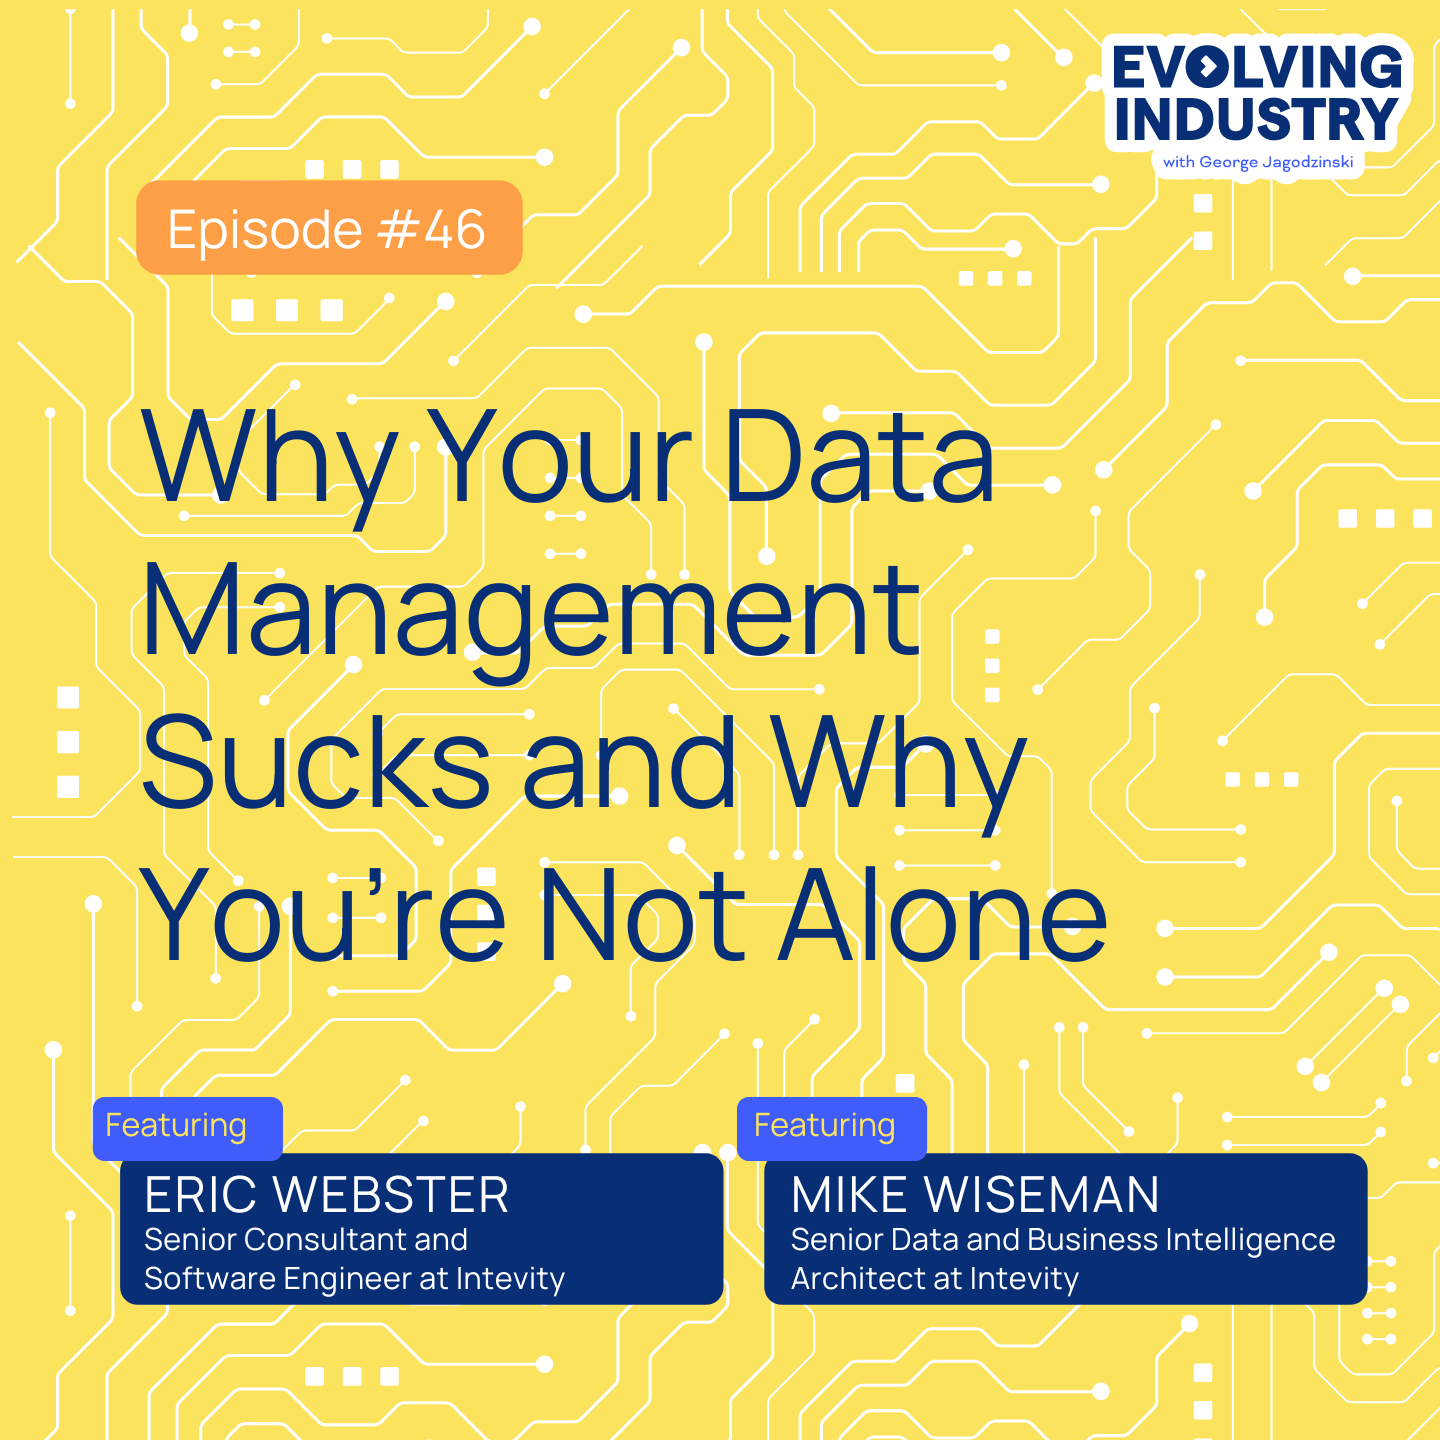 Why Your Data Management Sucks and Why You’re Not Alone